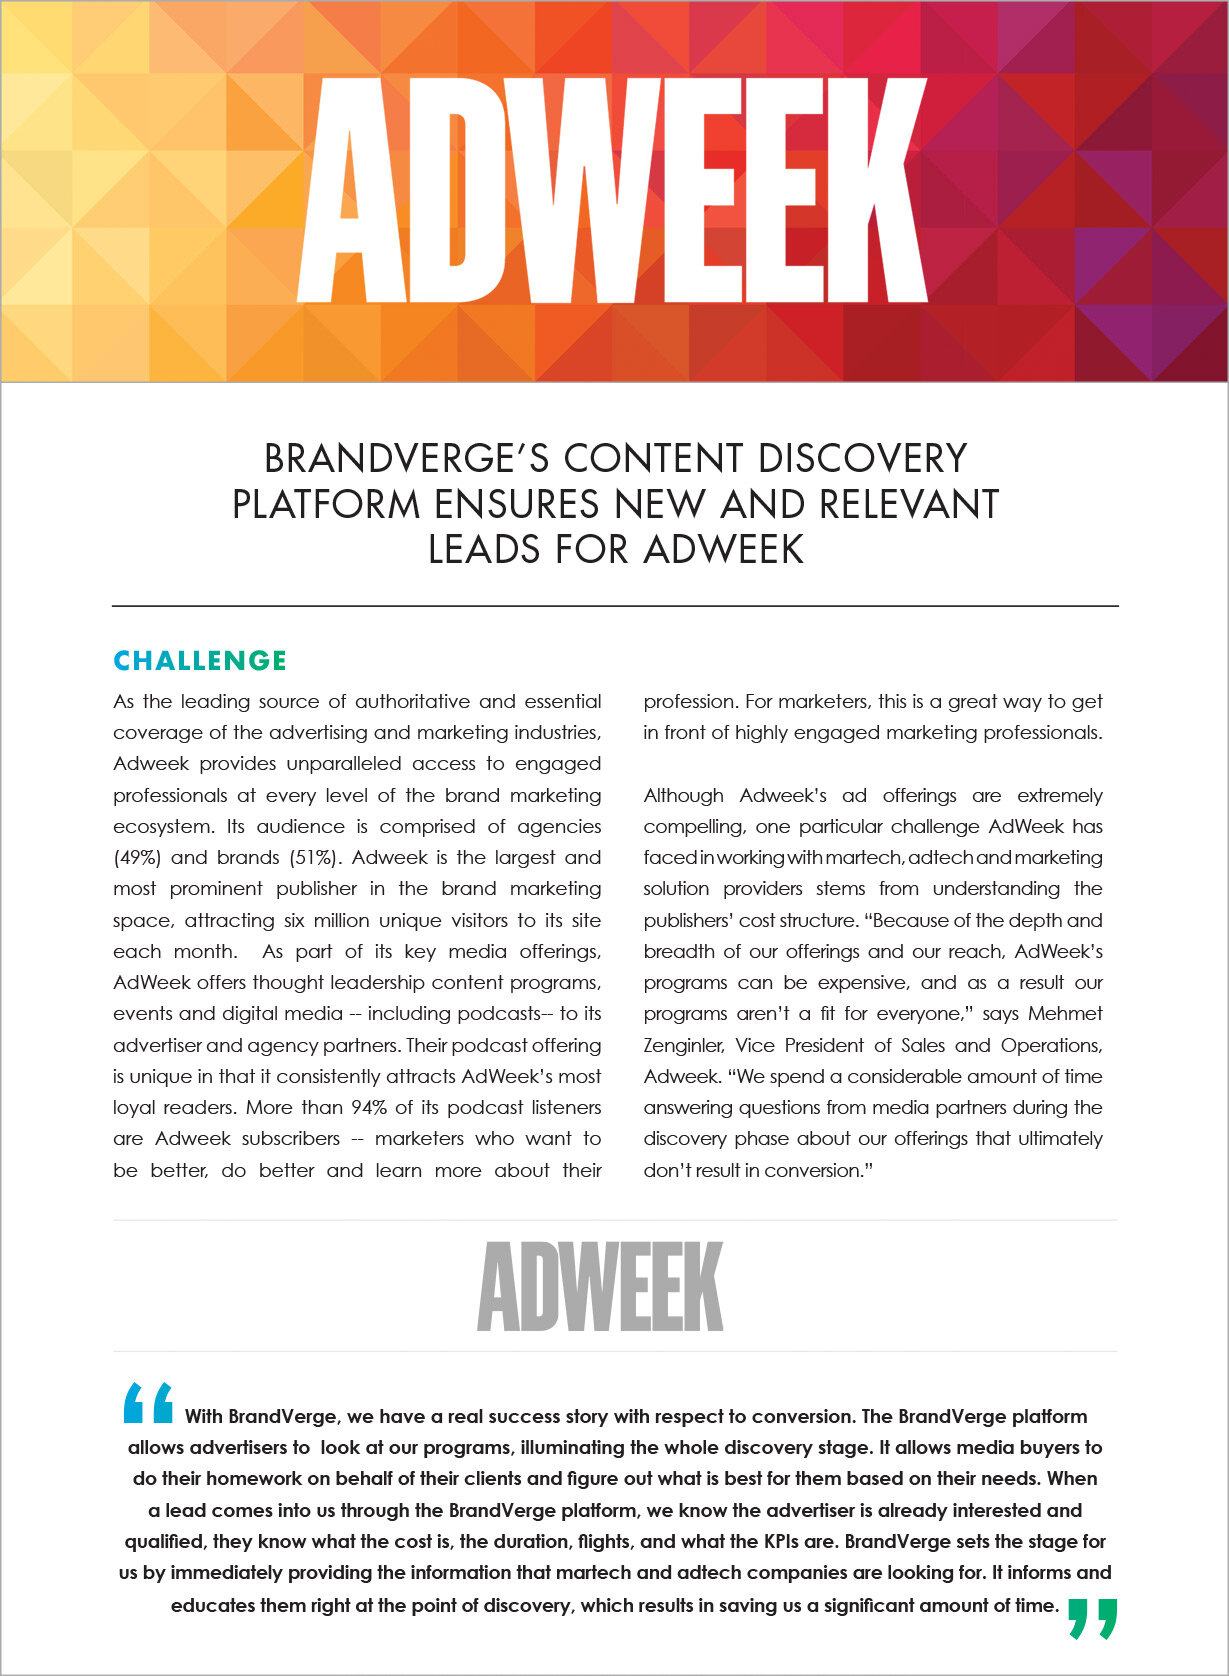 Brandvege's Content Discovery Platform Ensures New and Relevant Leads for Adweek